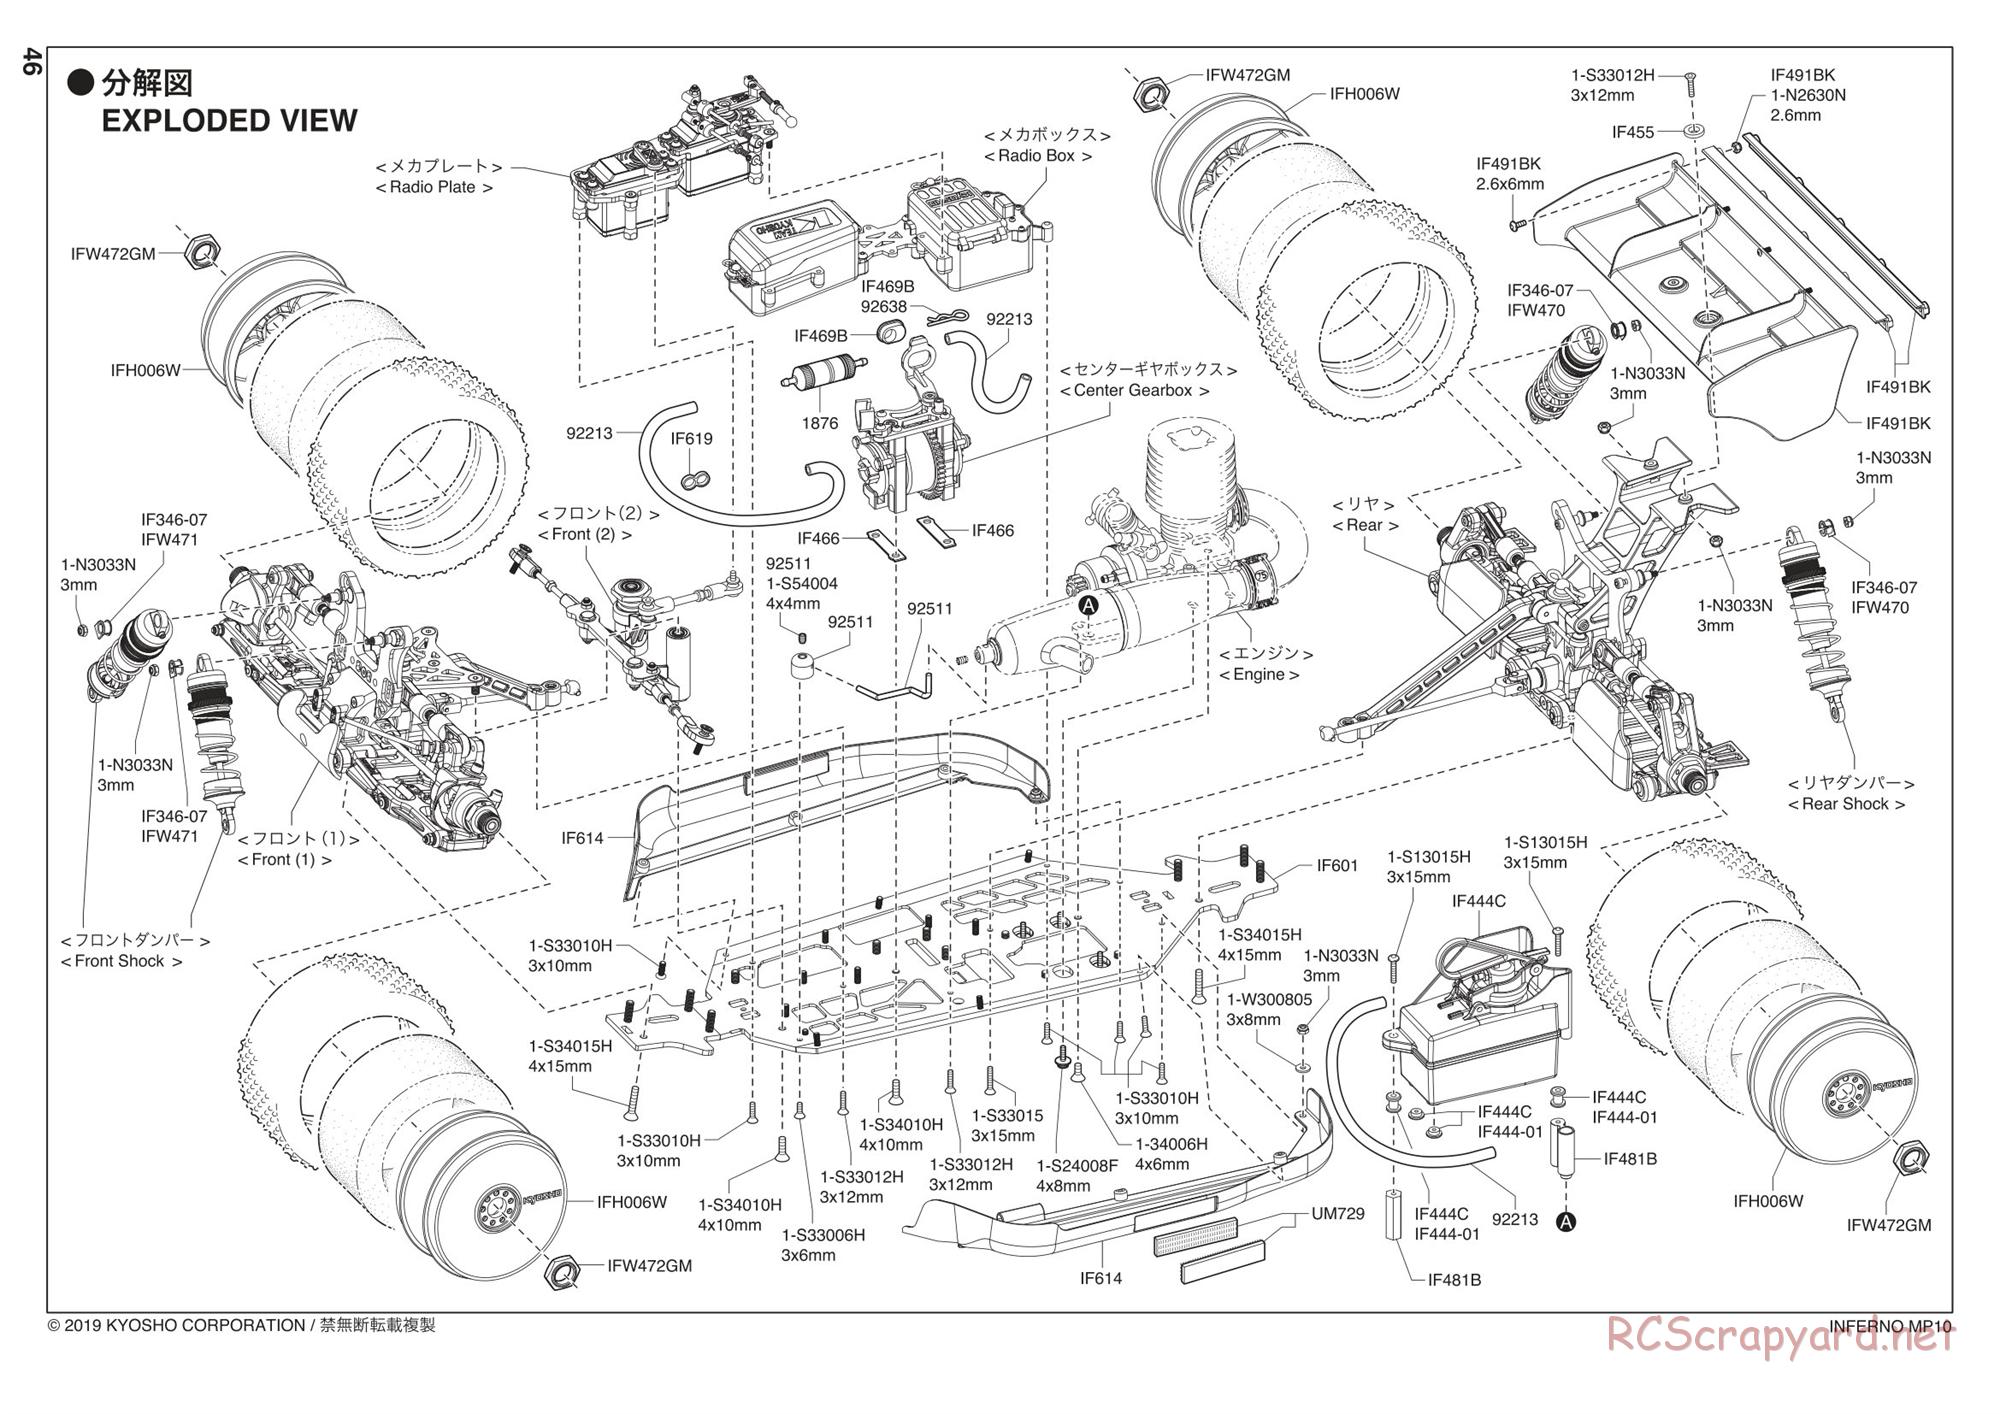 Kyosho - Inferno MP10 - Exploded Views - Page 1